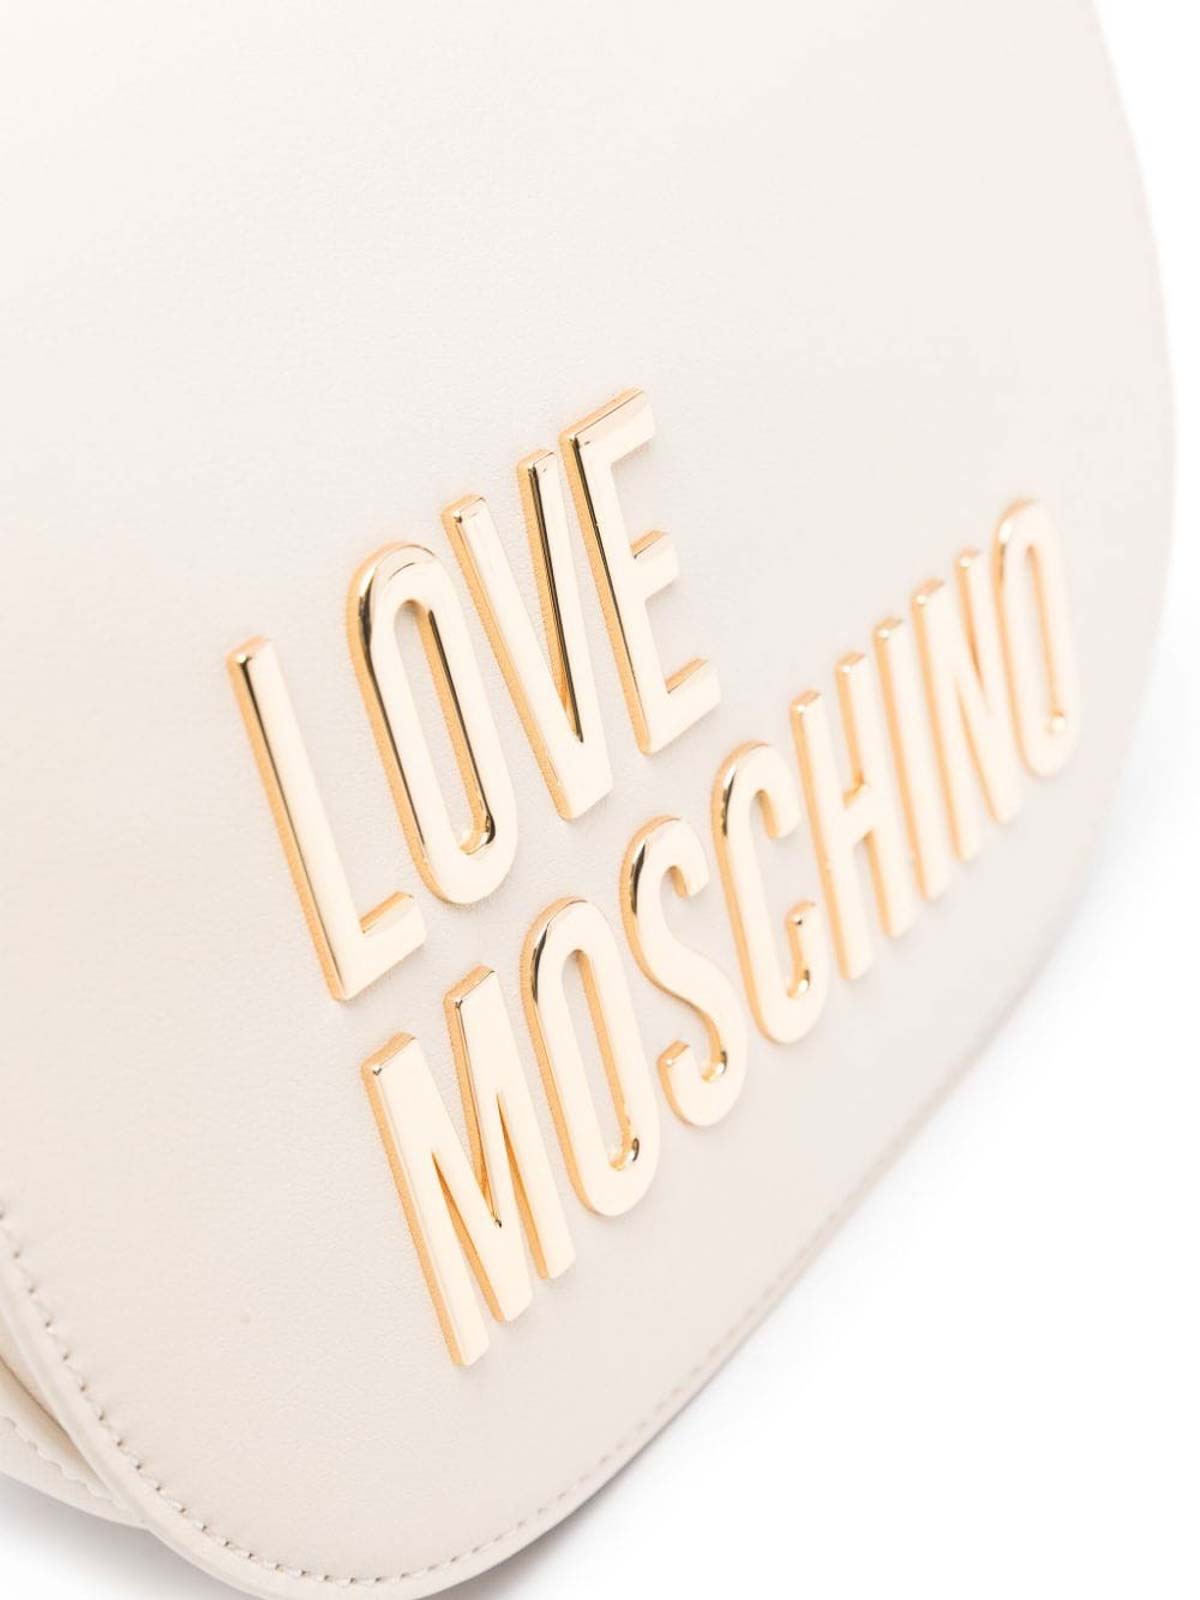 Shop Love Moschino Bag With Logo In White